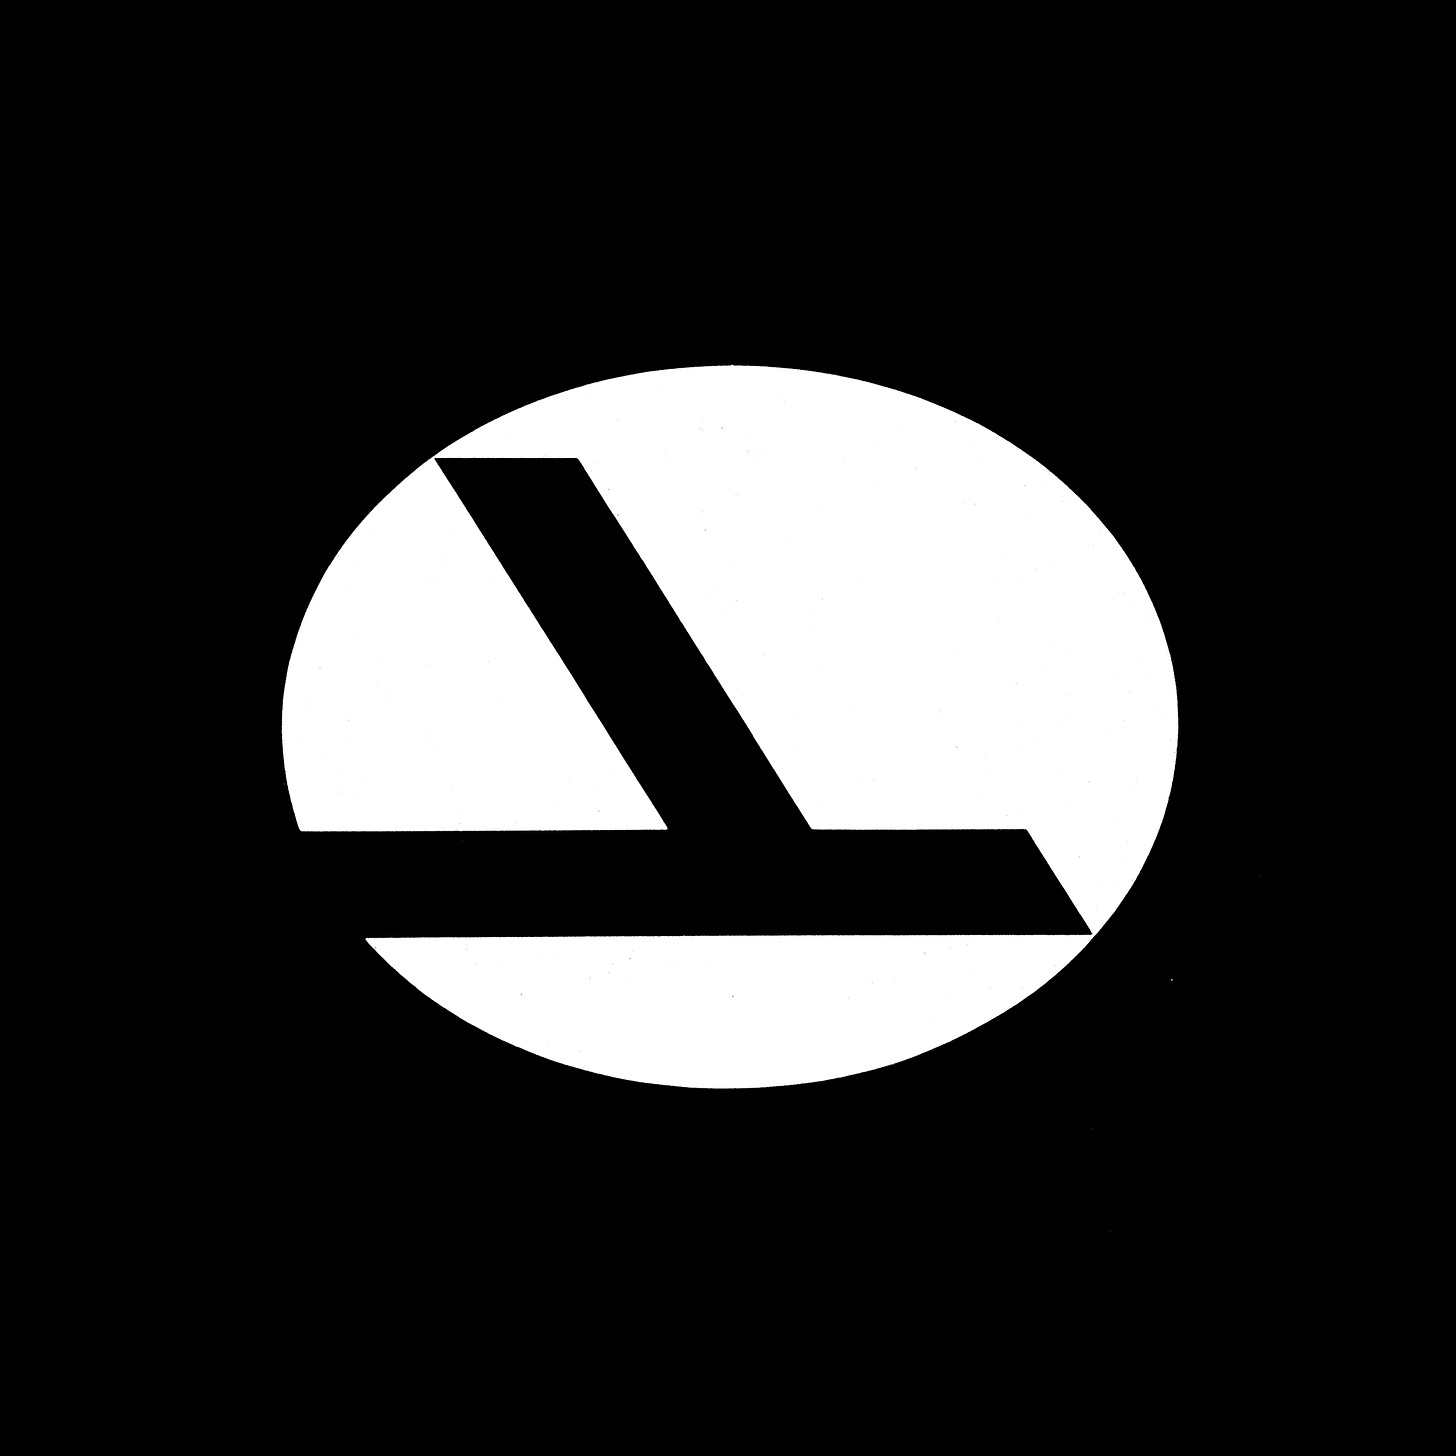 Lippincott & Margulies’ 1964 logo for Eastern Airlines